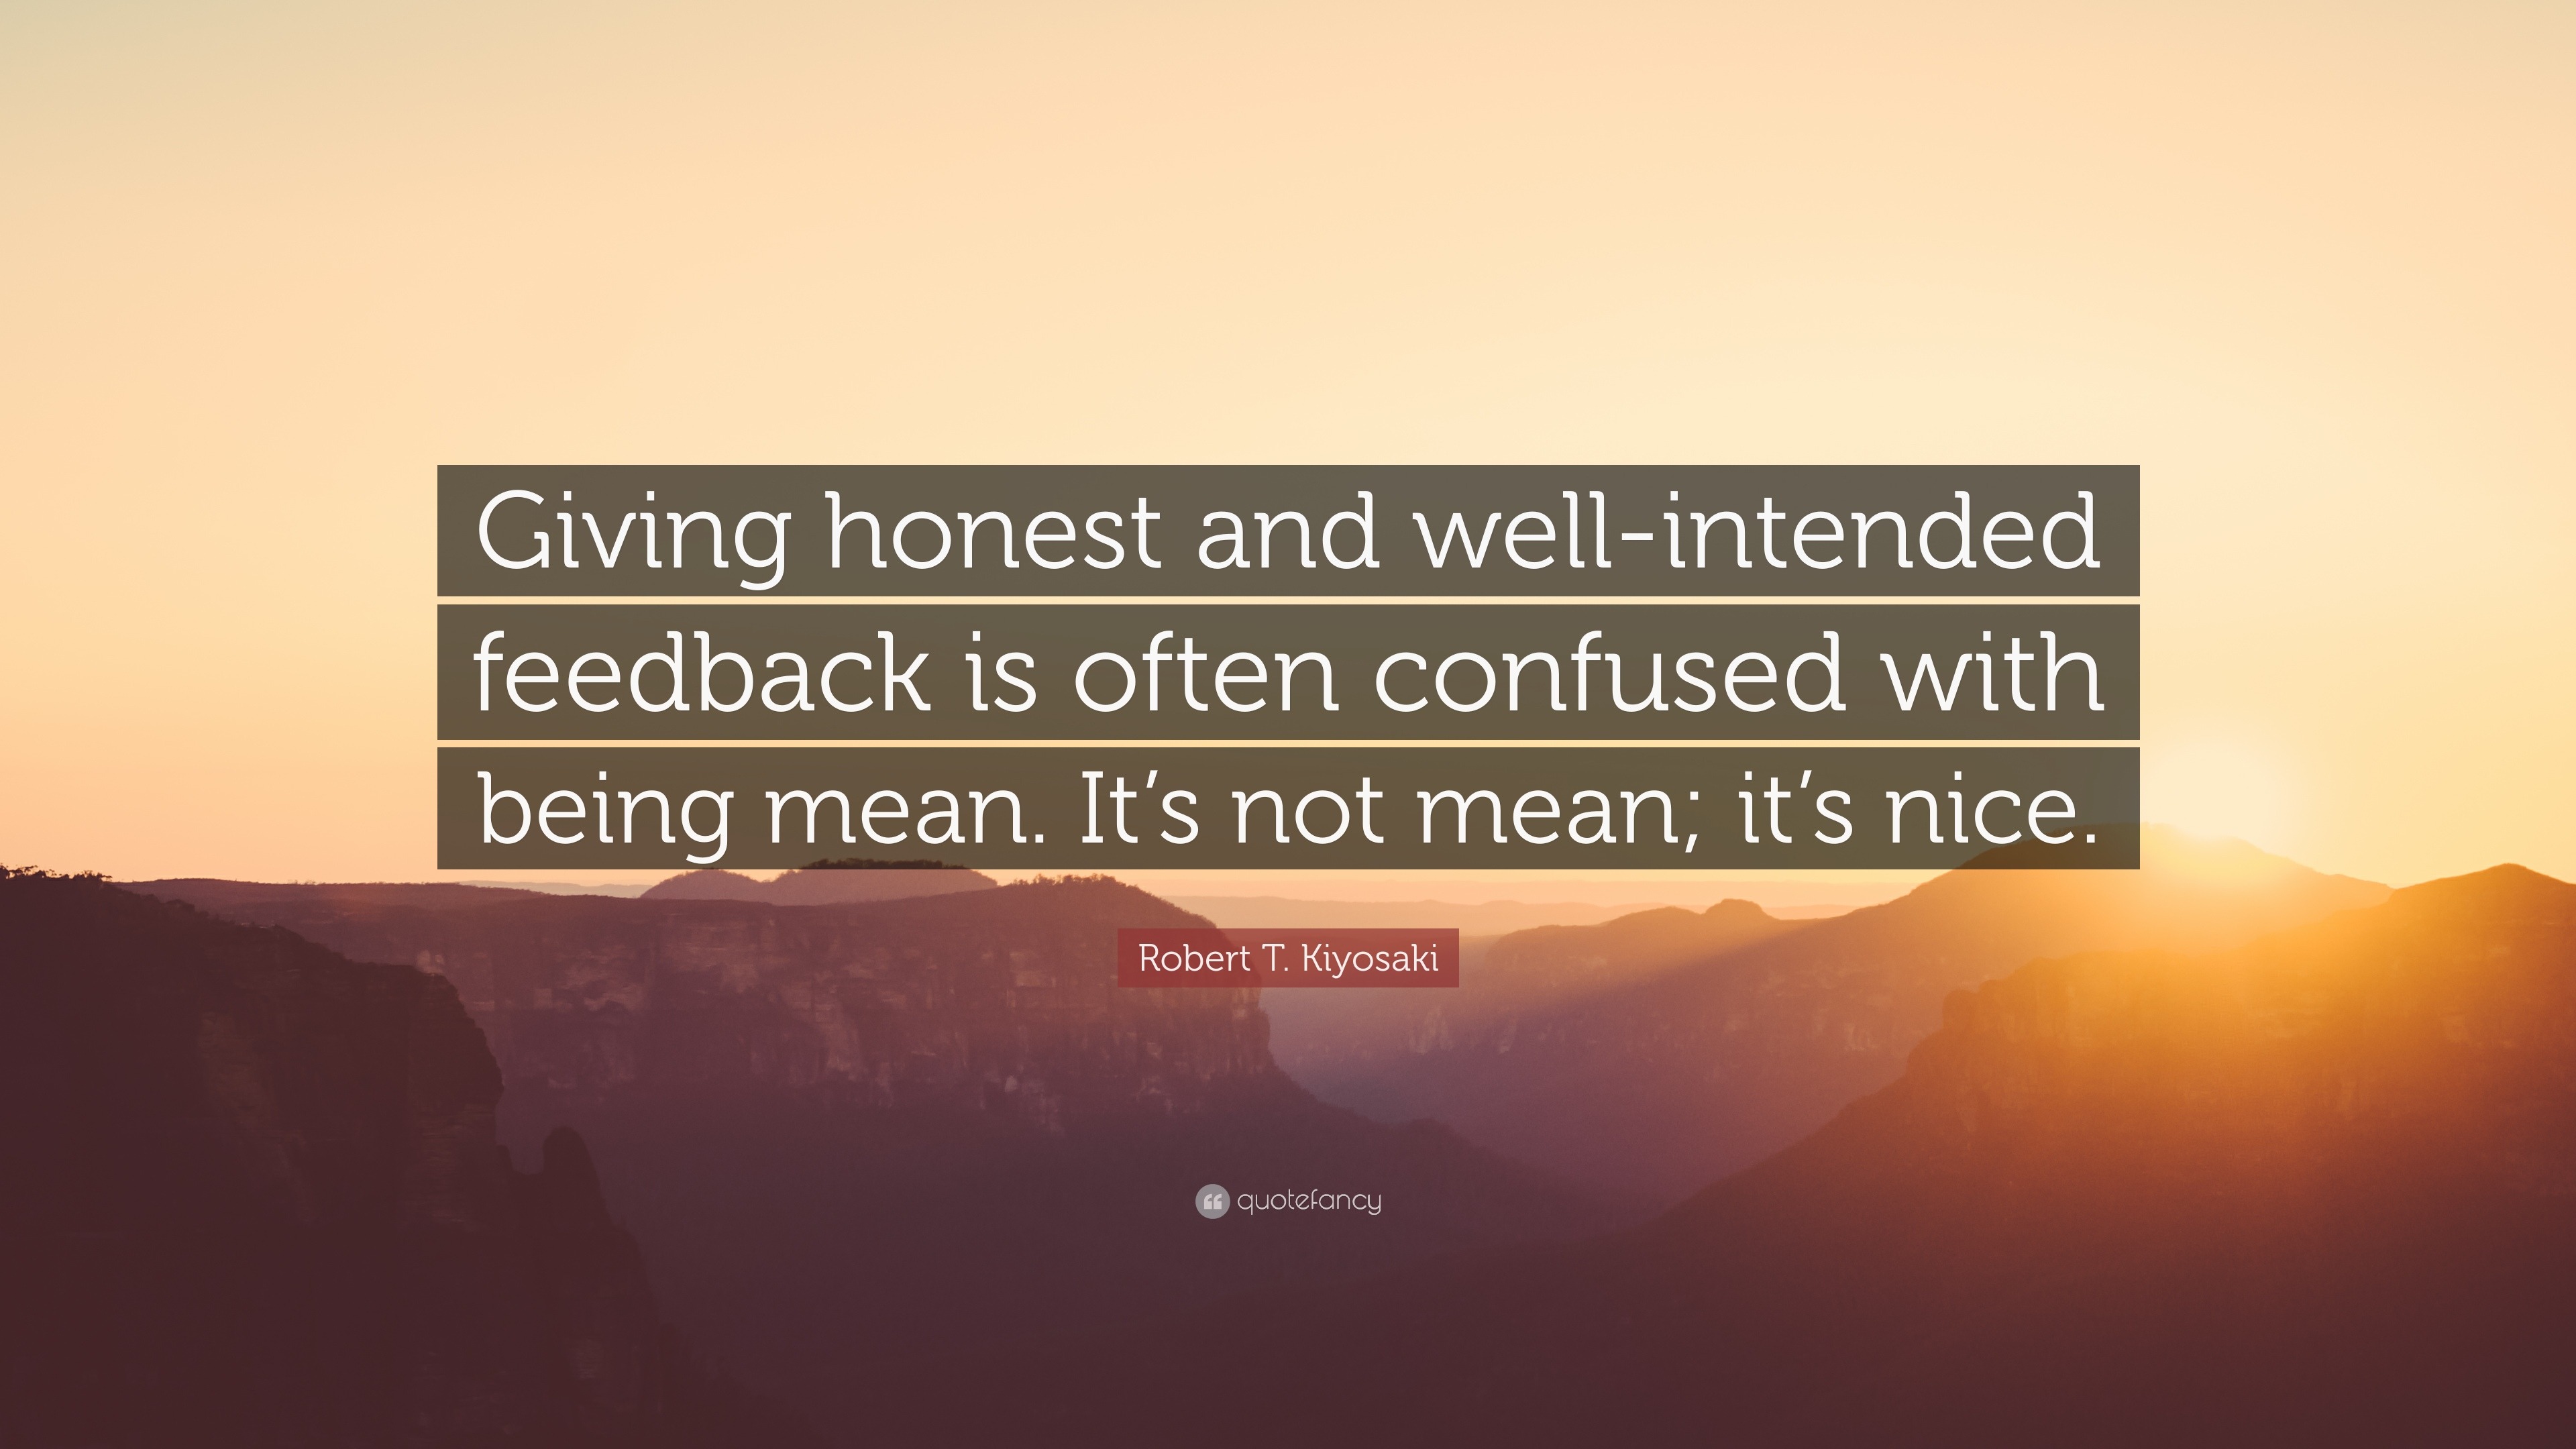 Robert T. Kiyosaki Quote: “Giving honest and well-intended feedback is